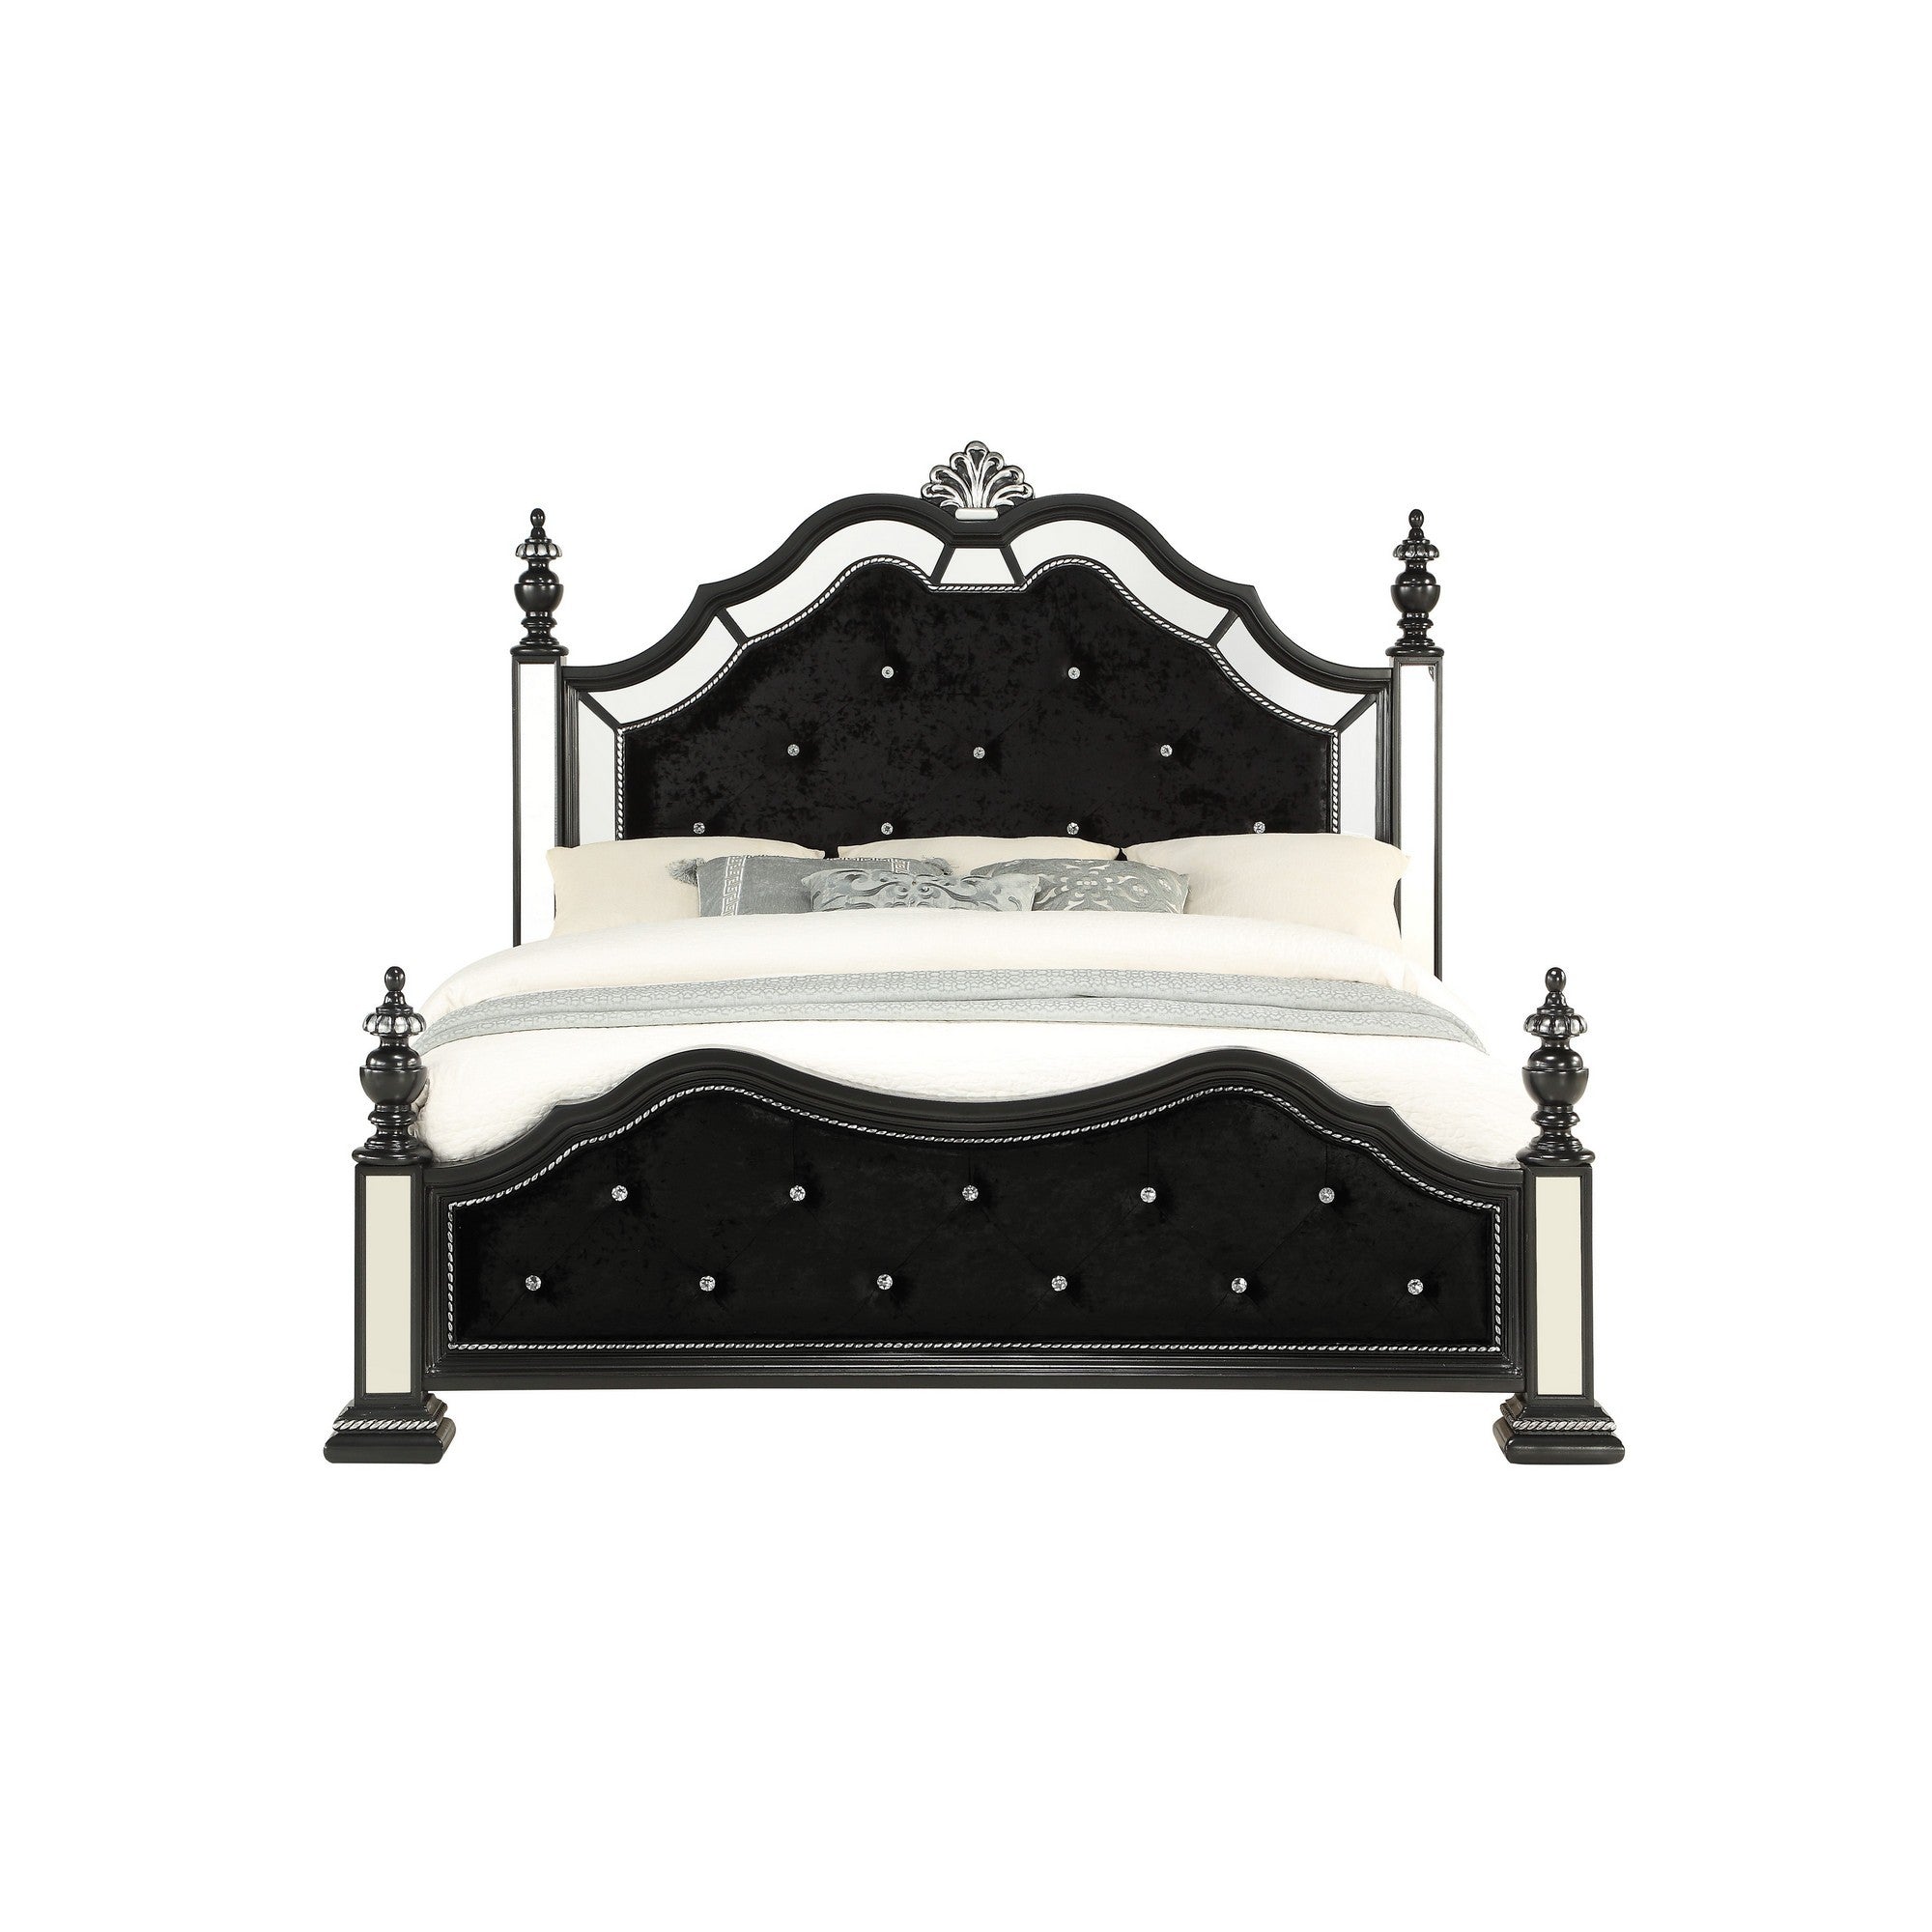 Black Felt finish Queen Bed with crystal mirrored embellished